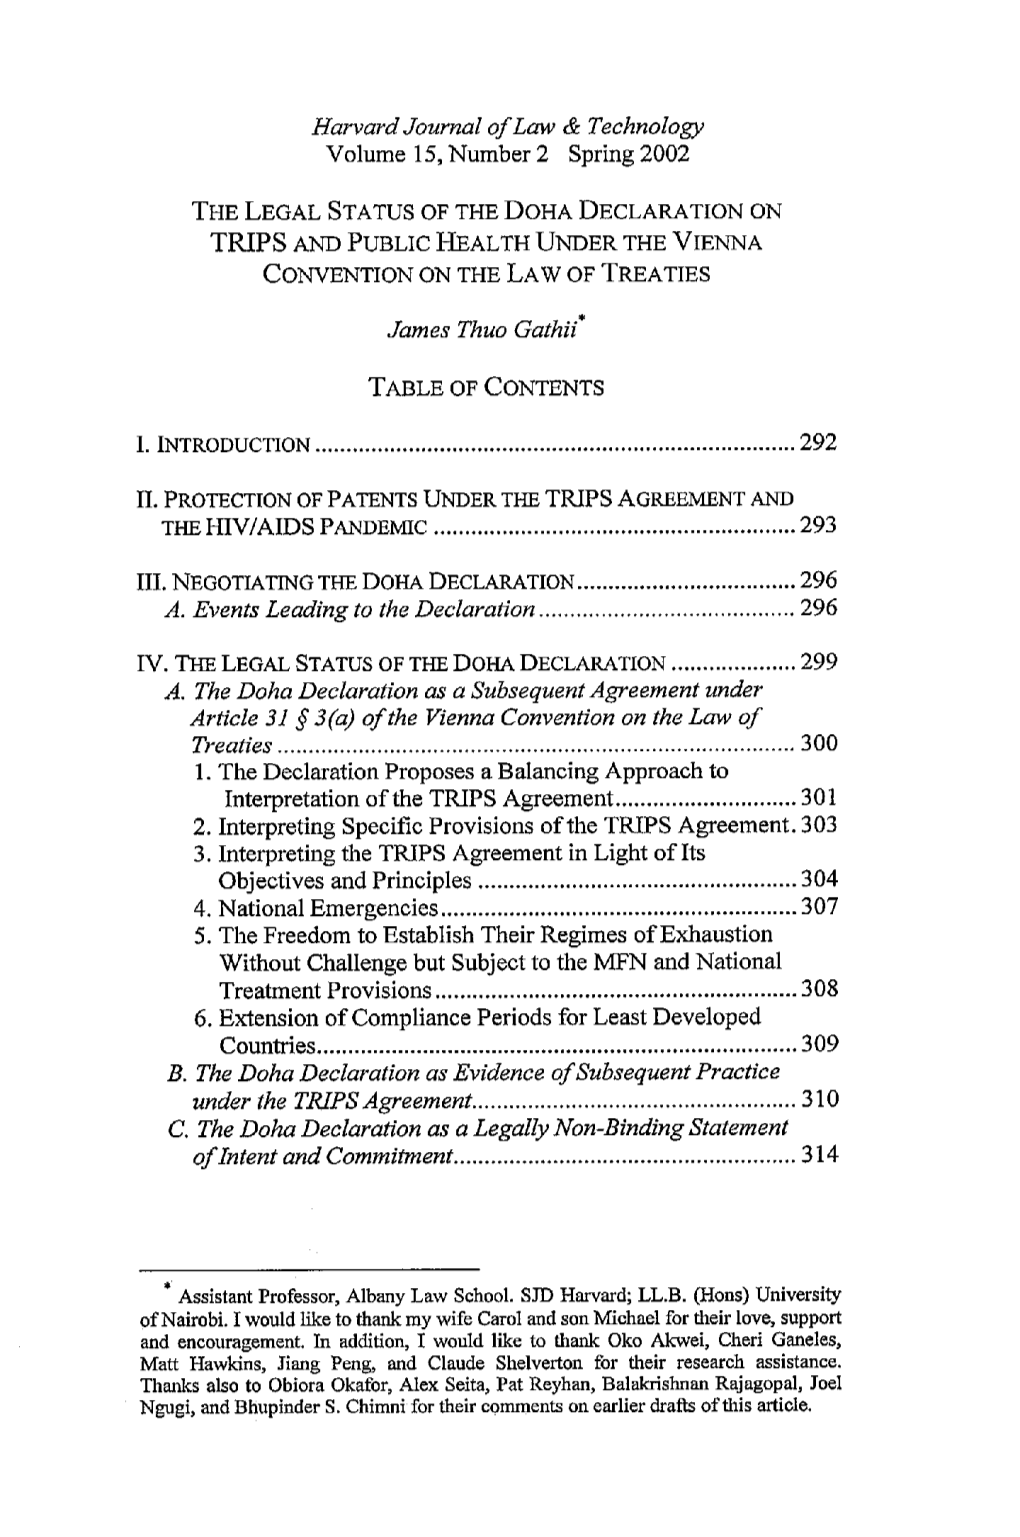 The Legal Status of the Doha Declaration on Trips and Public Health Under the Vienna Convention on the Law of Treaties